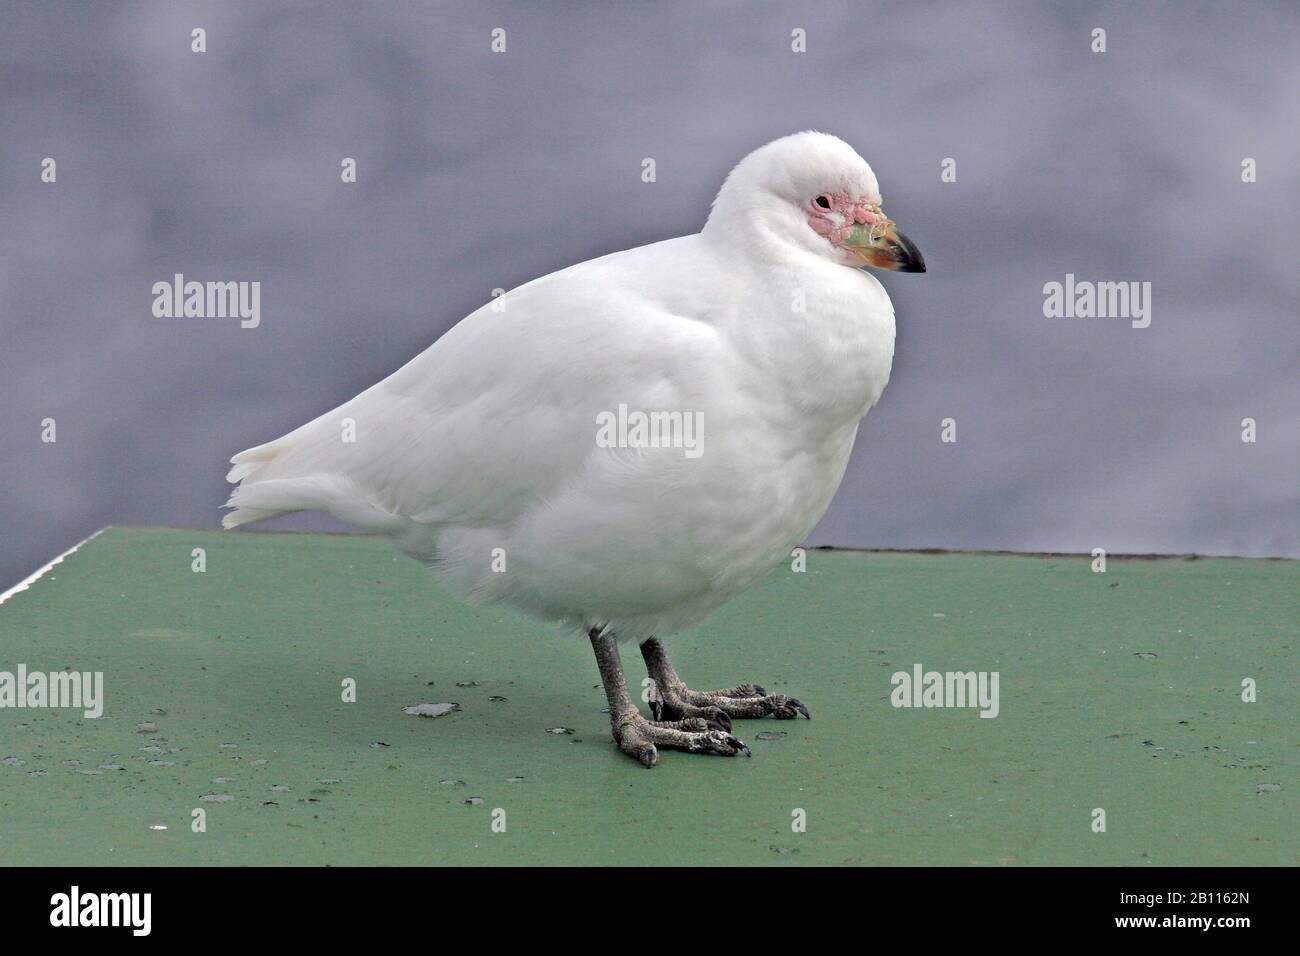 Snowy Sheathbill, Pale-faced sheathbill, Paddy (Chionis alba), resting on a expedition cruise ship, Antarctica Stock Photo